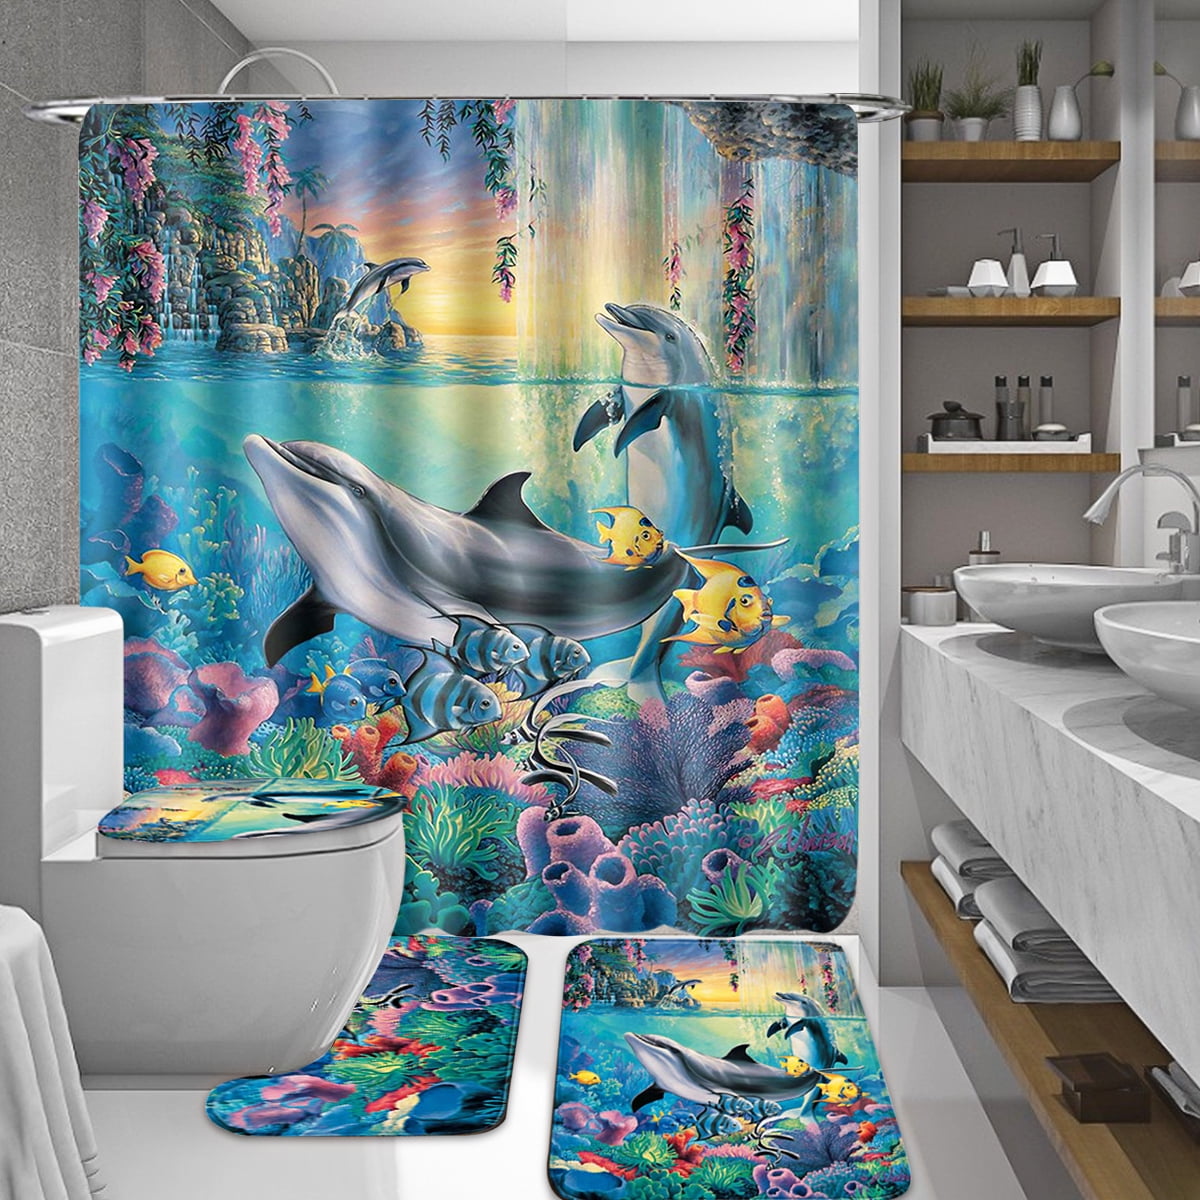 The Yellow Lily Theme Waterproof Fabric Home Decor Shower Curtain Bathroom Mat 